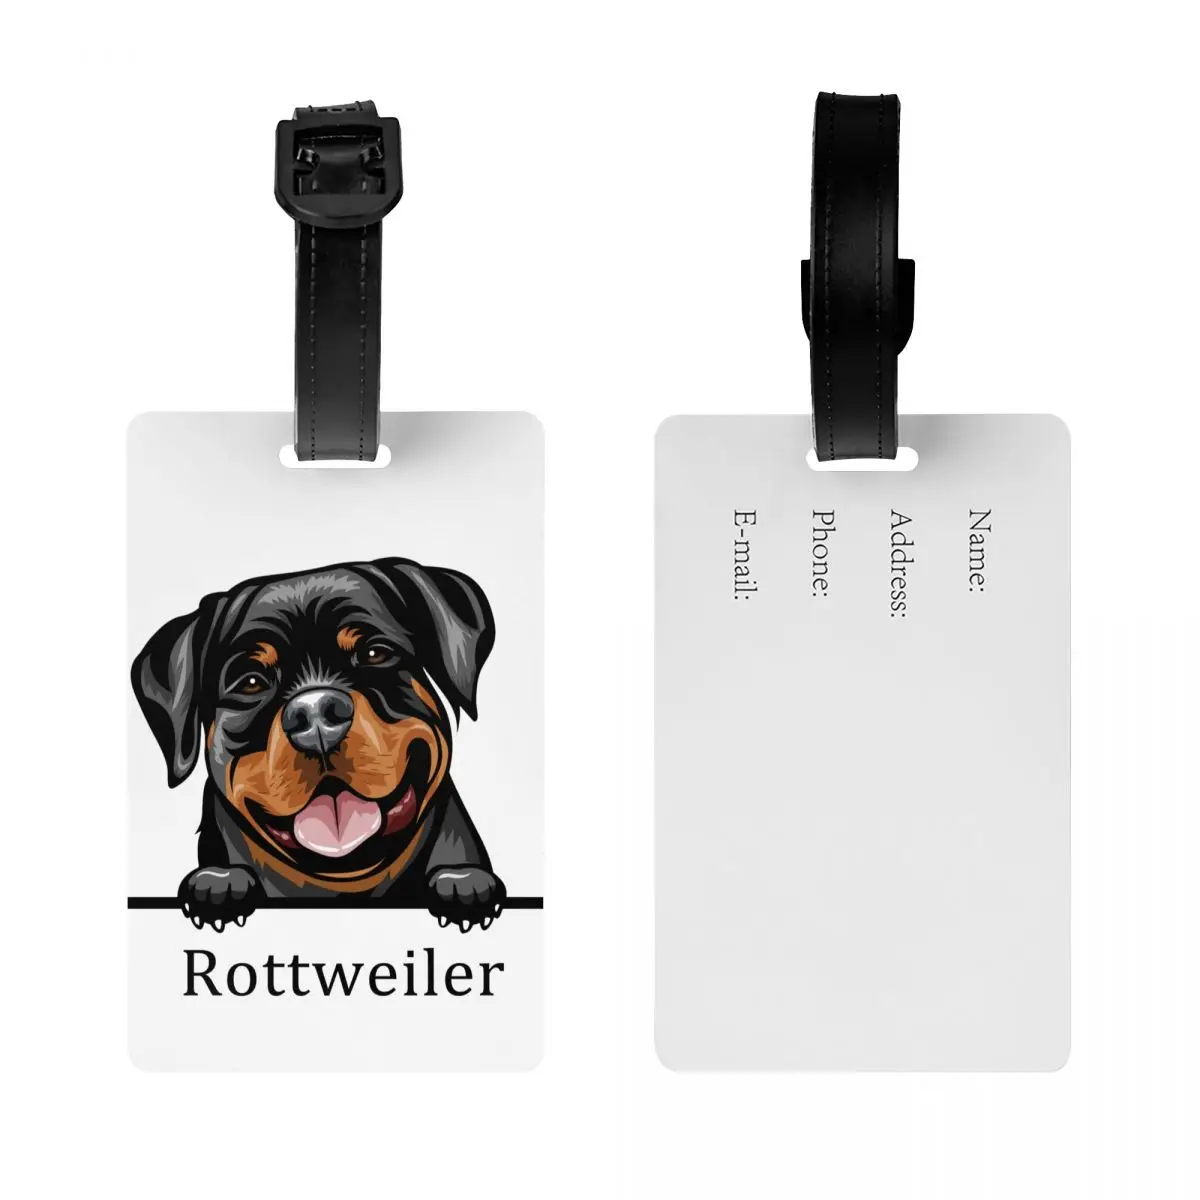 Custom Rottweiler Dog Luggage Tag With Name Card Pet Animal Privacy Cover ID Label for Travel Bag Suitcase